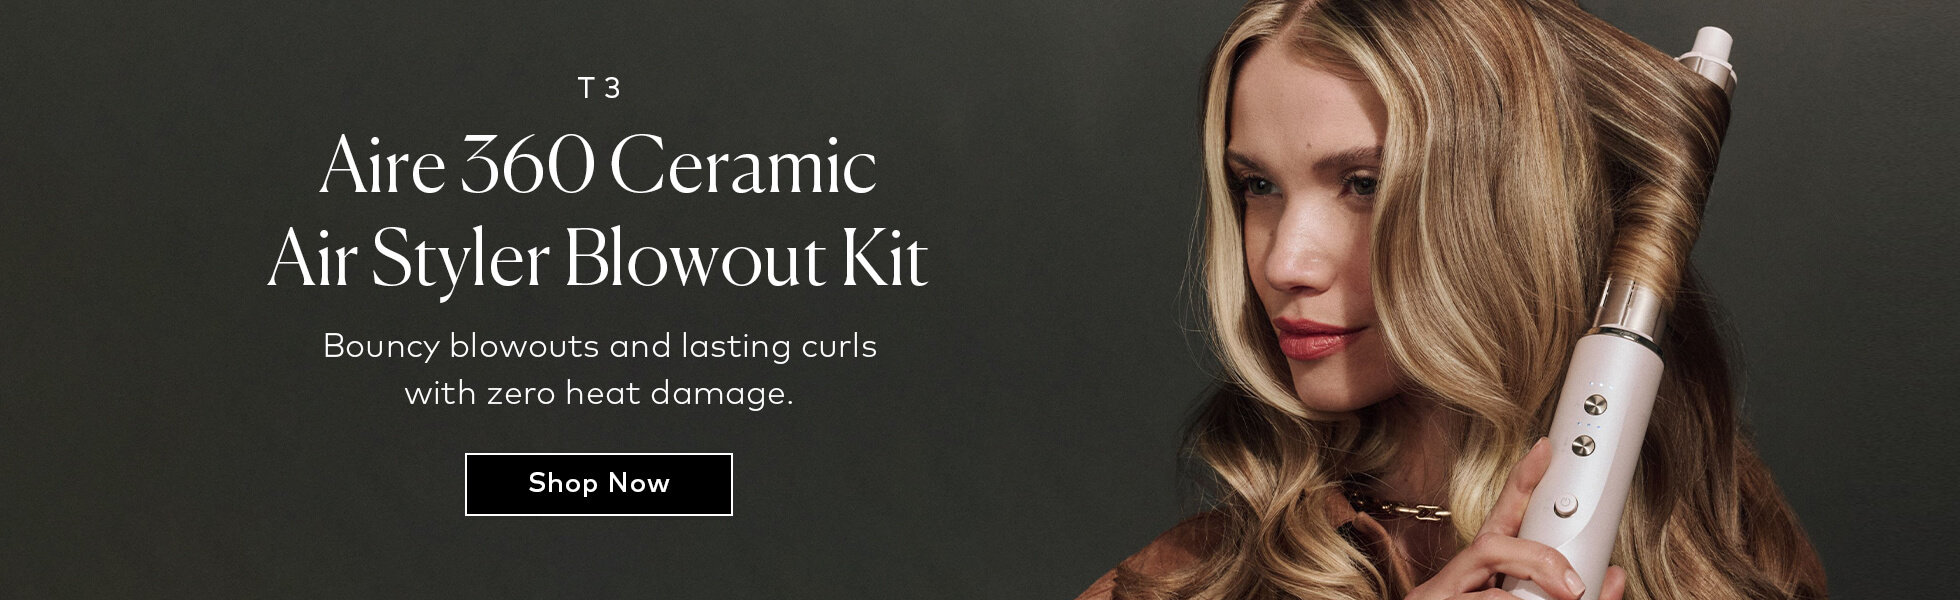 Shop the T3 Aire 360 Ceramic Air Styler Blowout Kit